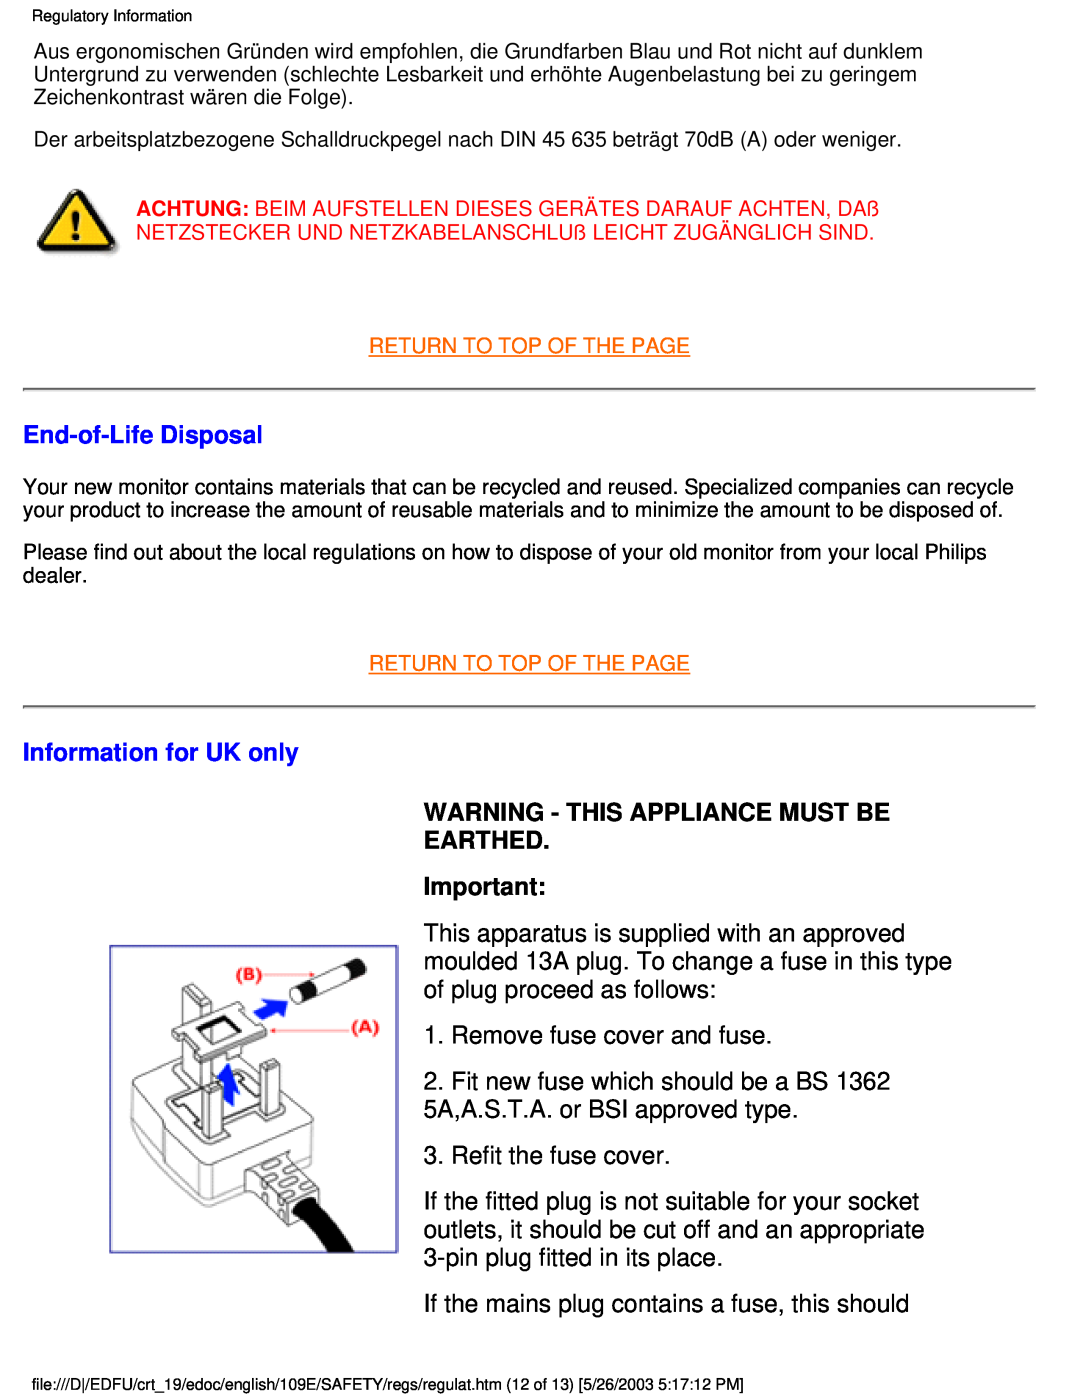 Philips 109E5 user manual End-of-Life Disposal, Information for UK only, Warning - This Appliance Must Be Earthed 